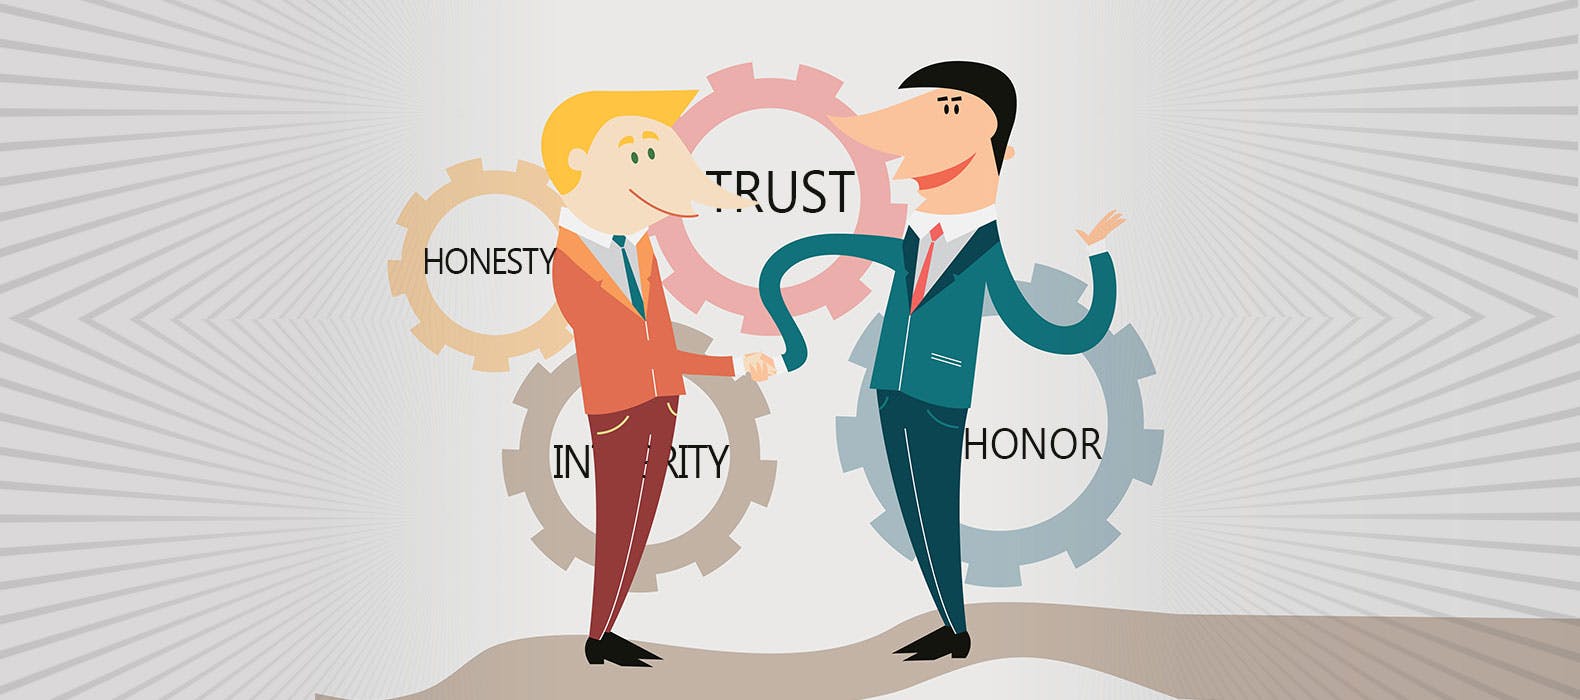 How To Build Trust In The Workplace